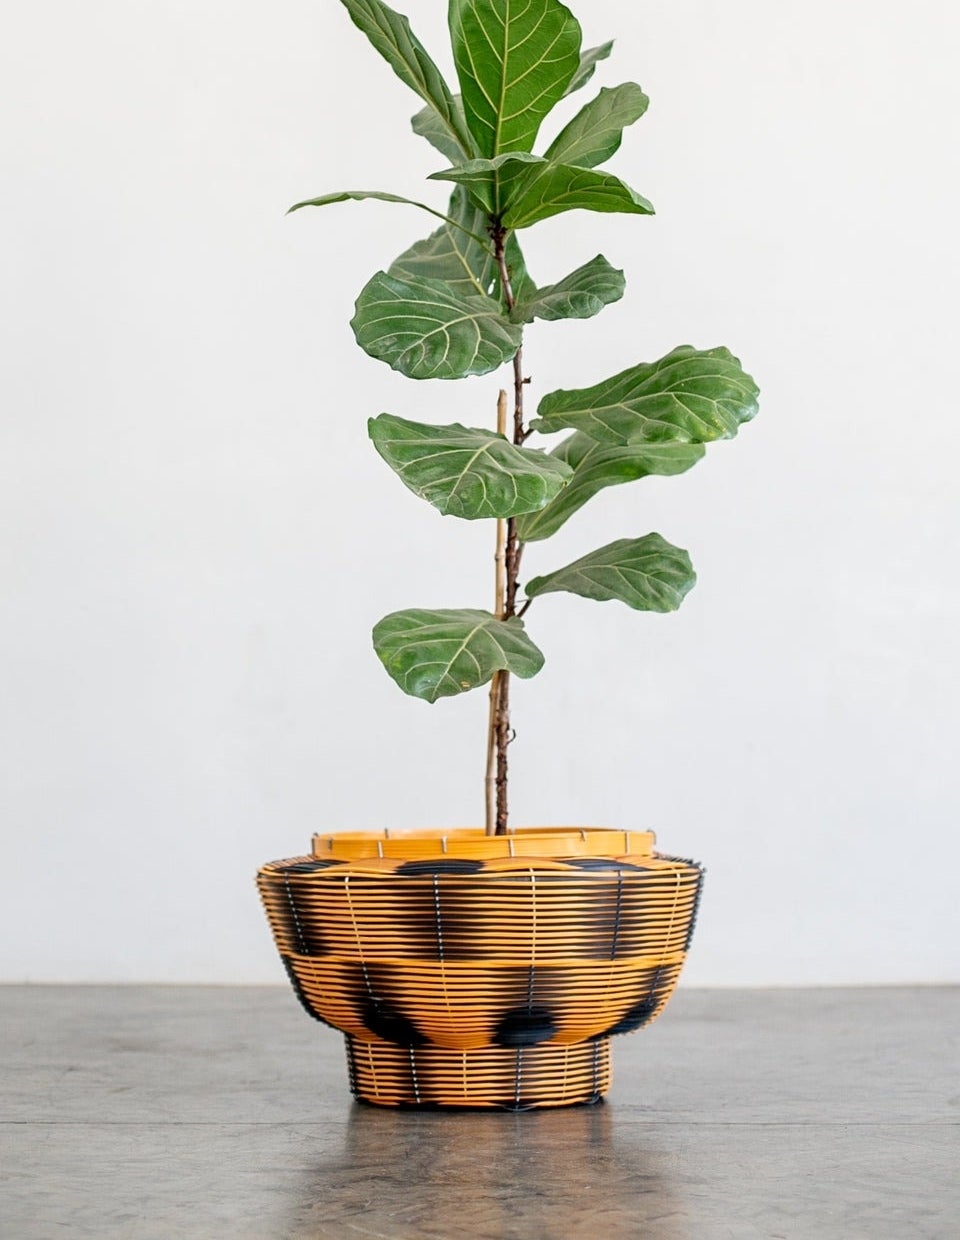 A black and orange woven planter is shown holding a tall plant